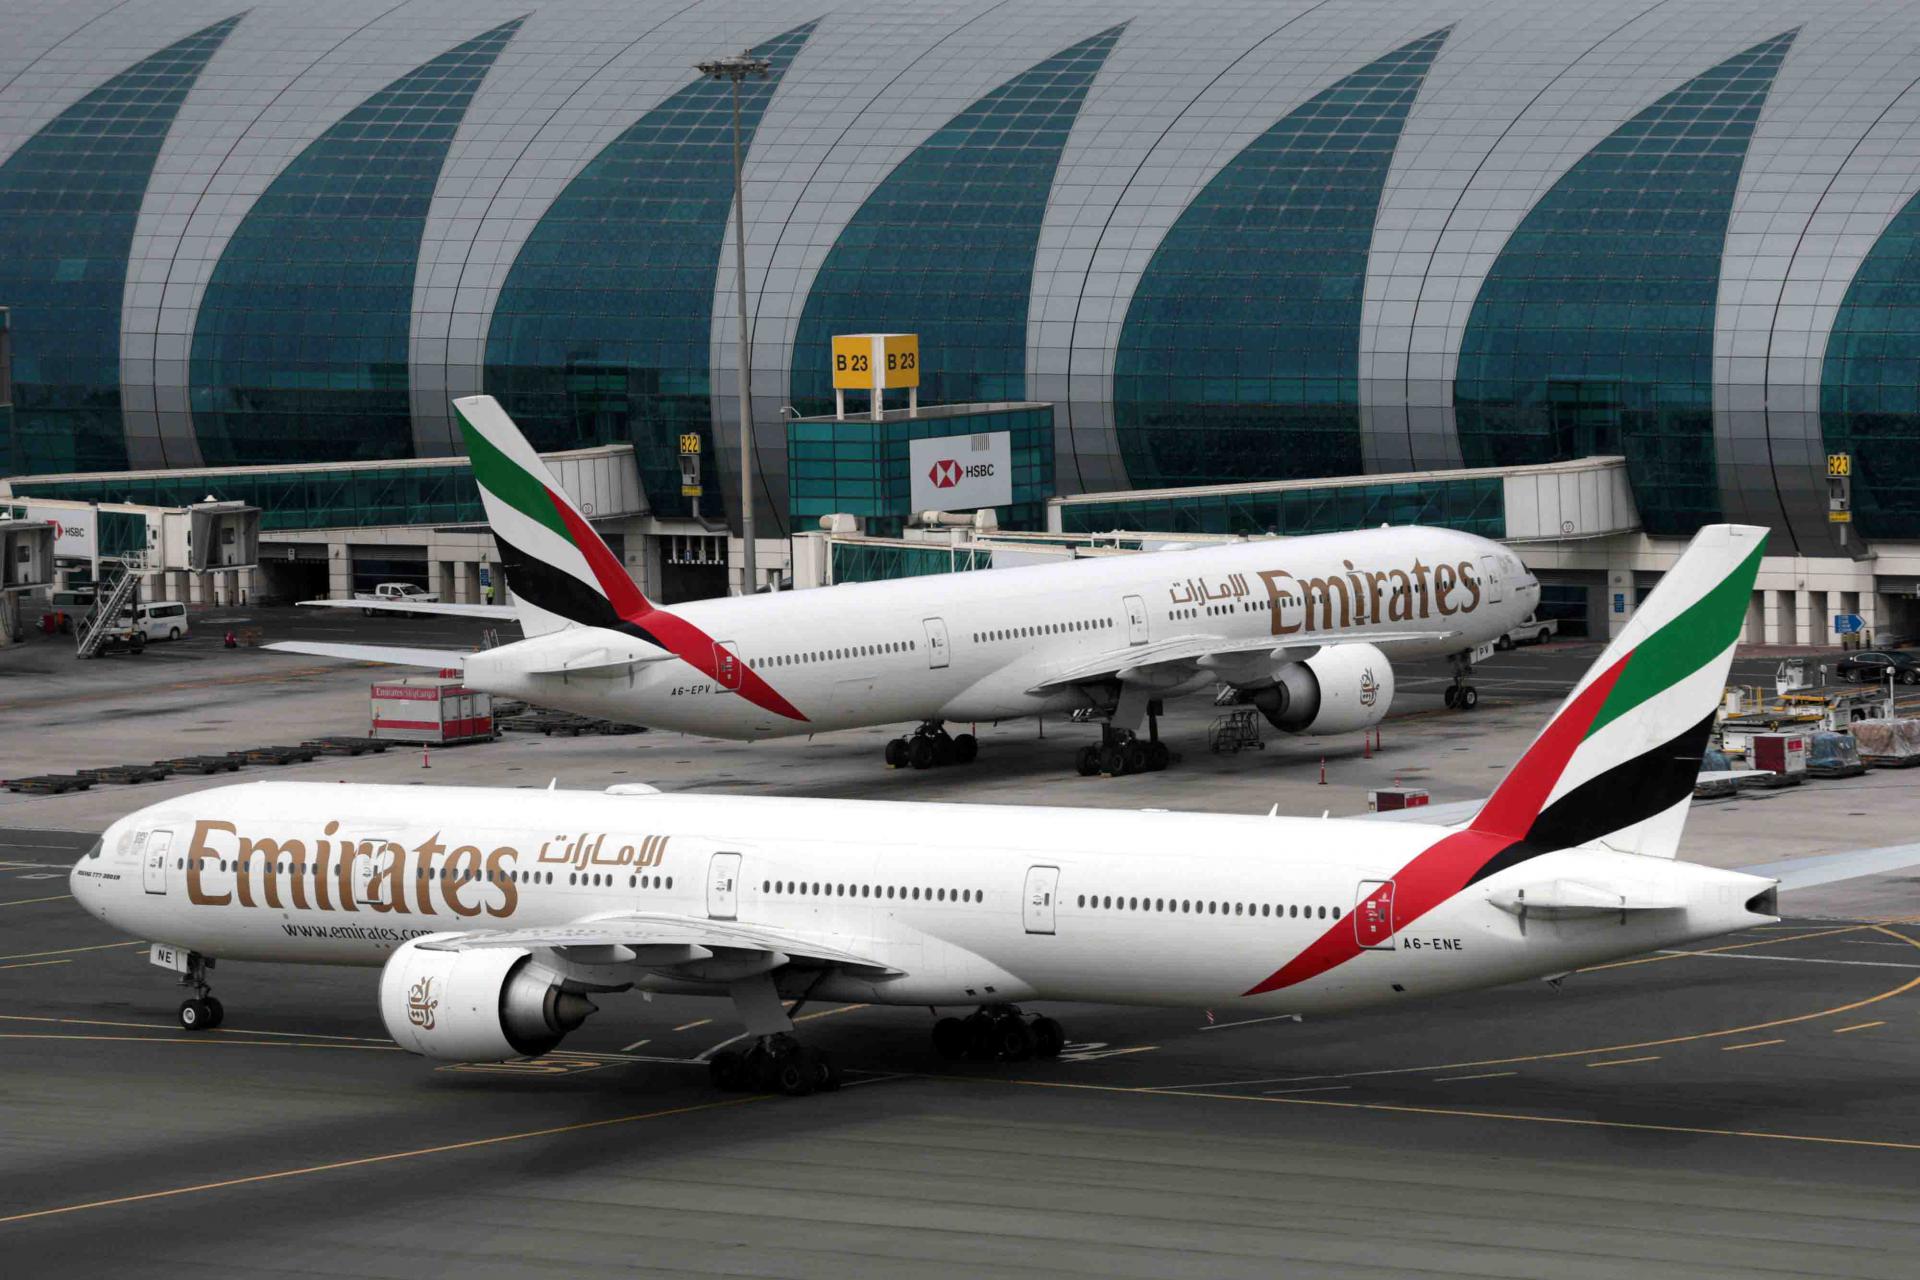 In February, Emirates cut 39 aircraft from its order for the Airbus 380 superjumbo